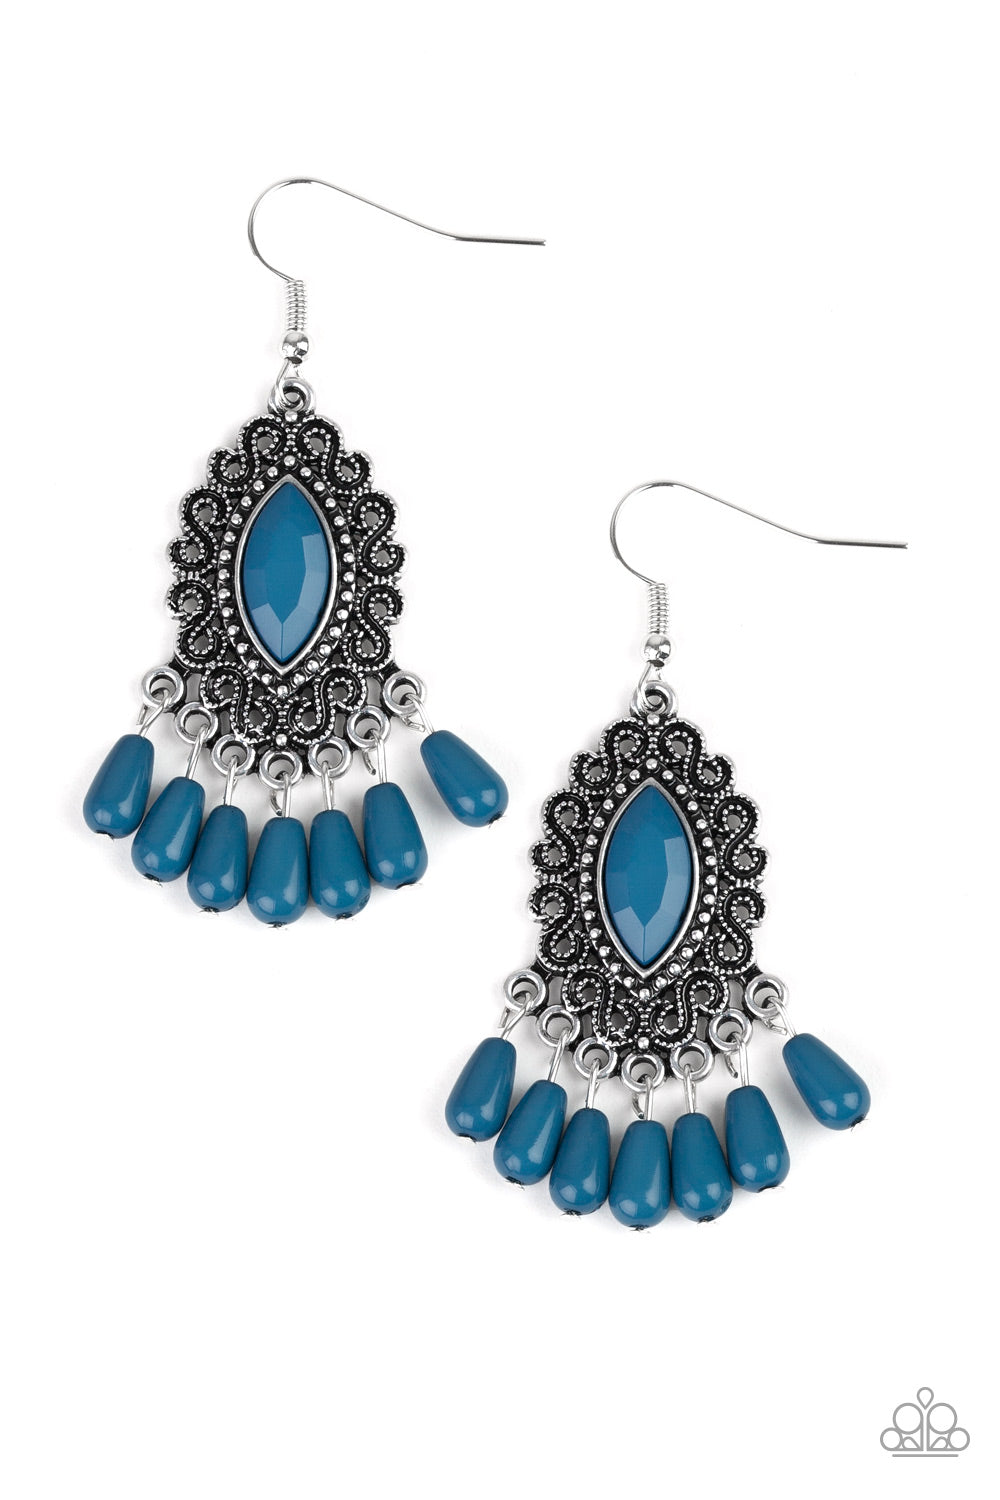 Private Villa - Paparazzi - Blue Faceted Bead Silver Filigree Earrings